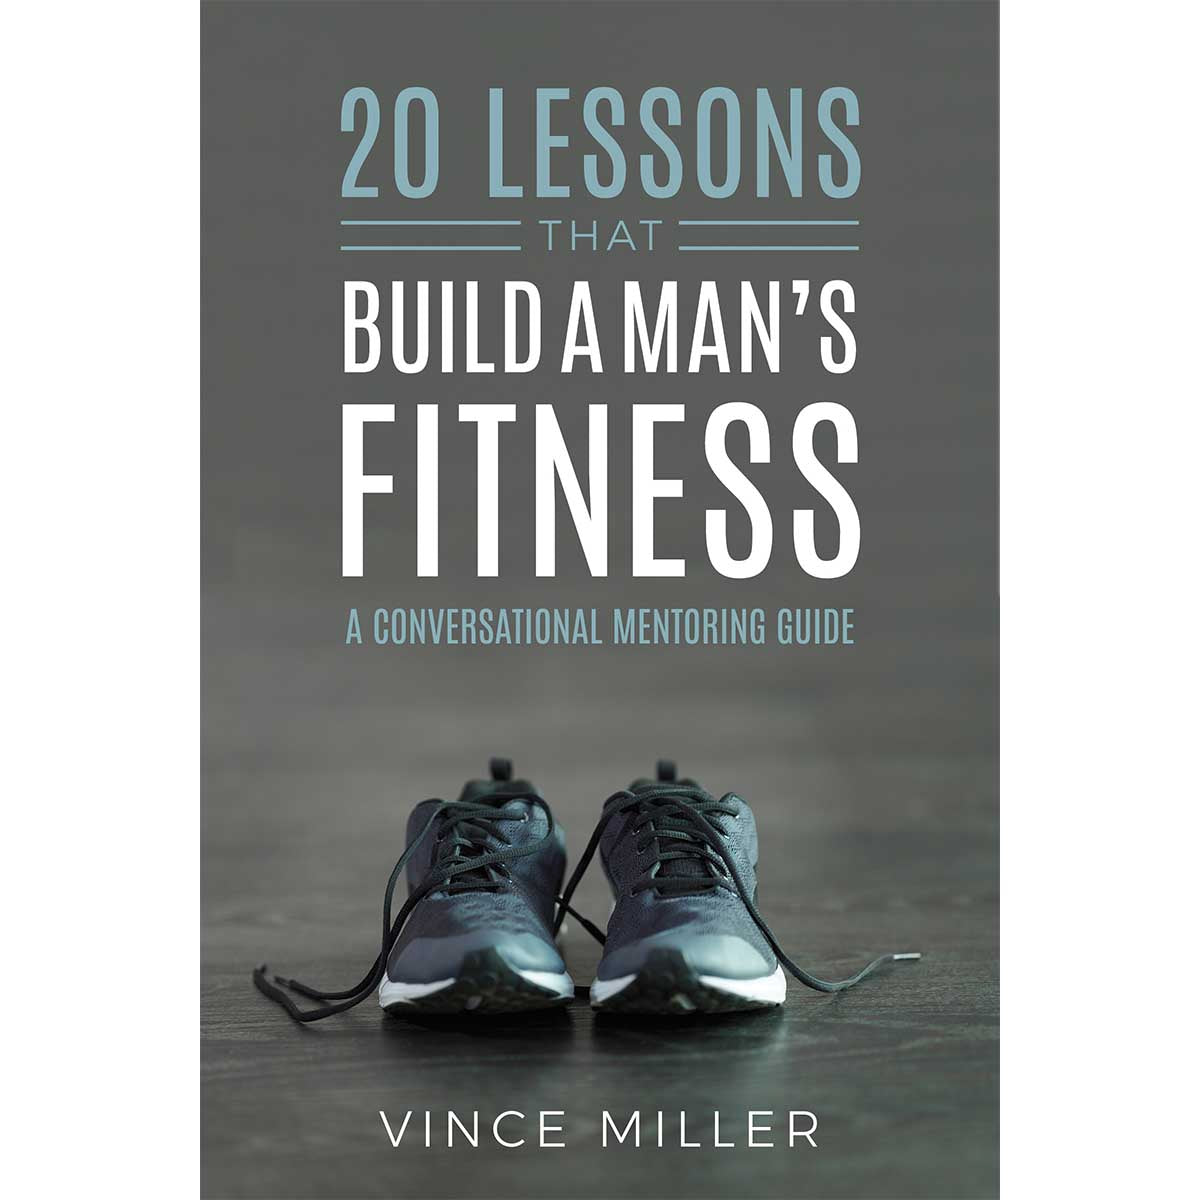 Twenty Lessons That Build a Man's Fitness: A Conversational Mentoring Guide